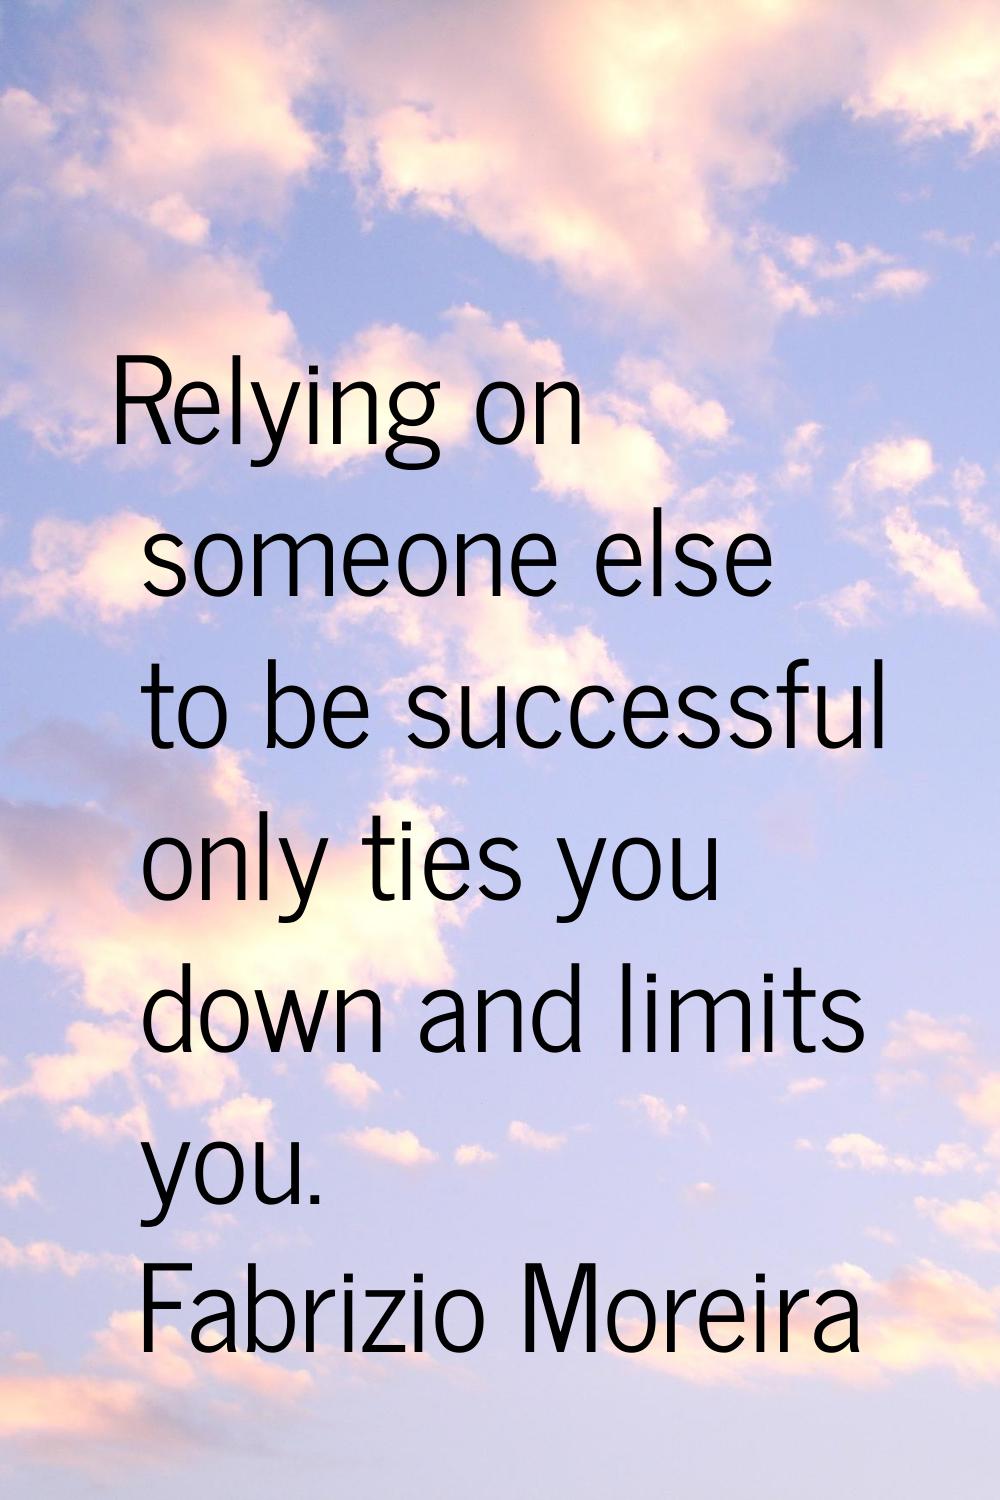 Relying on someone else to be successful only ties you down and limits you.